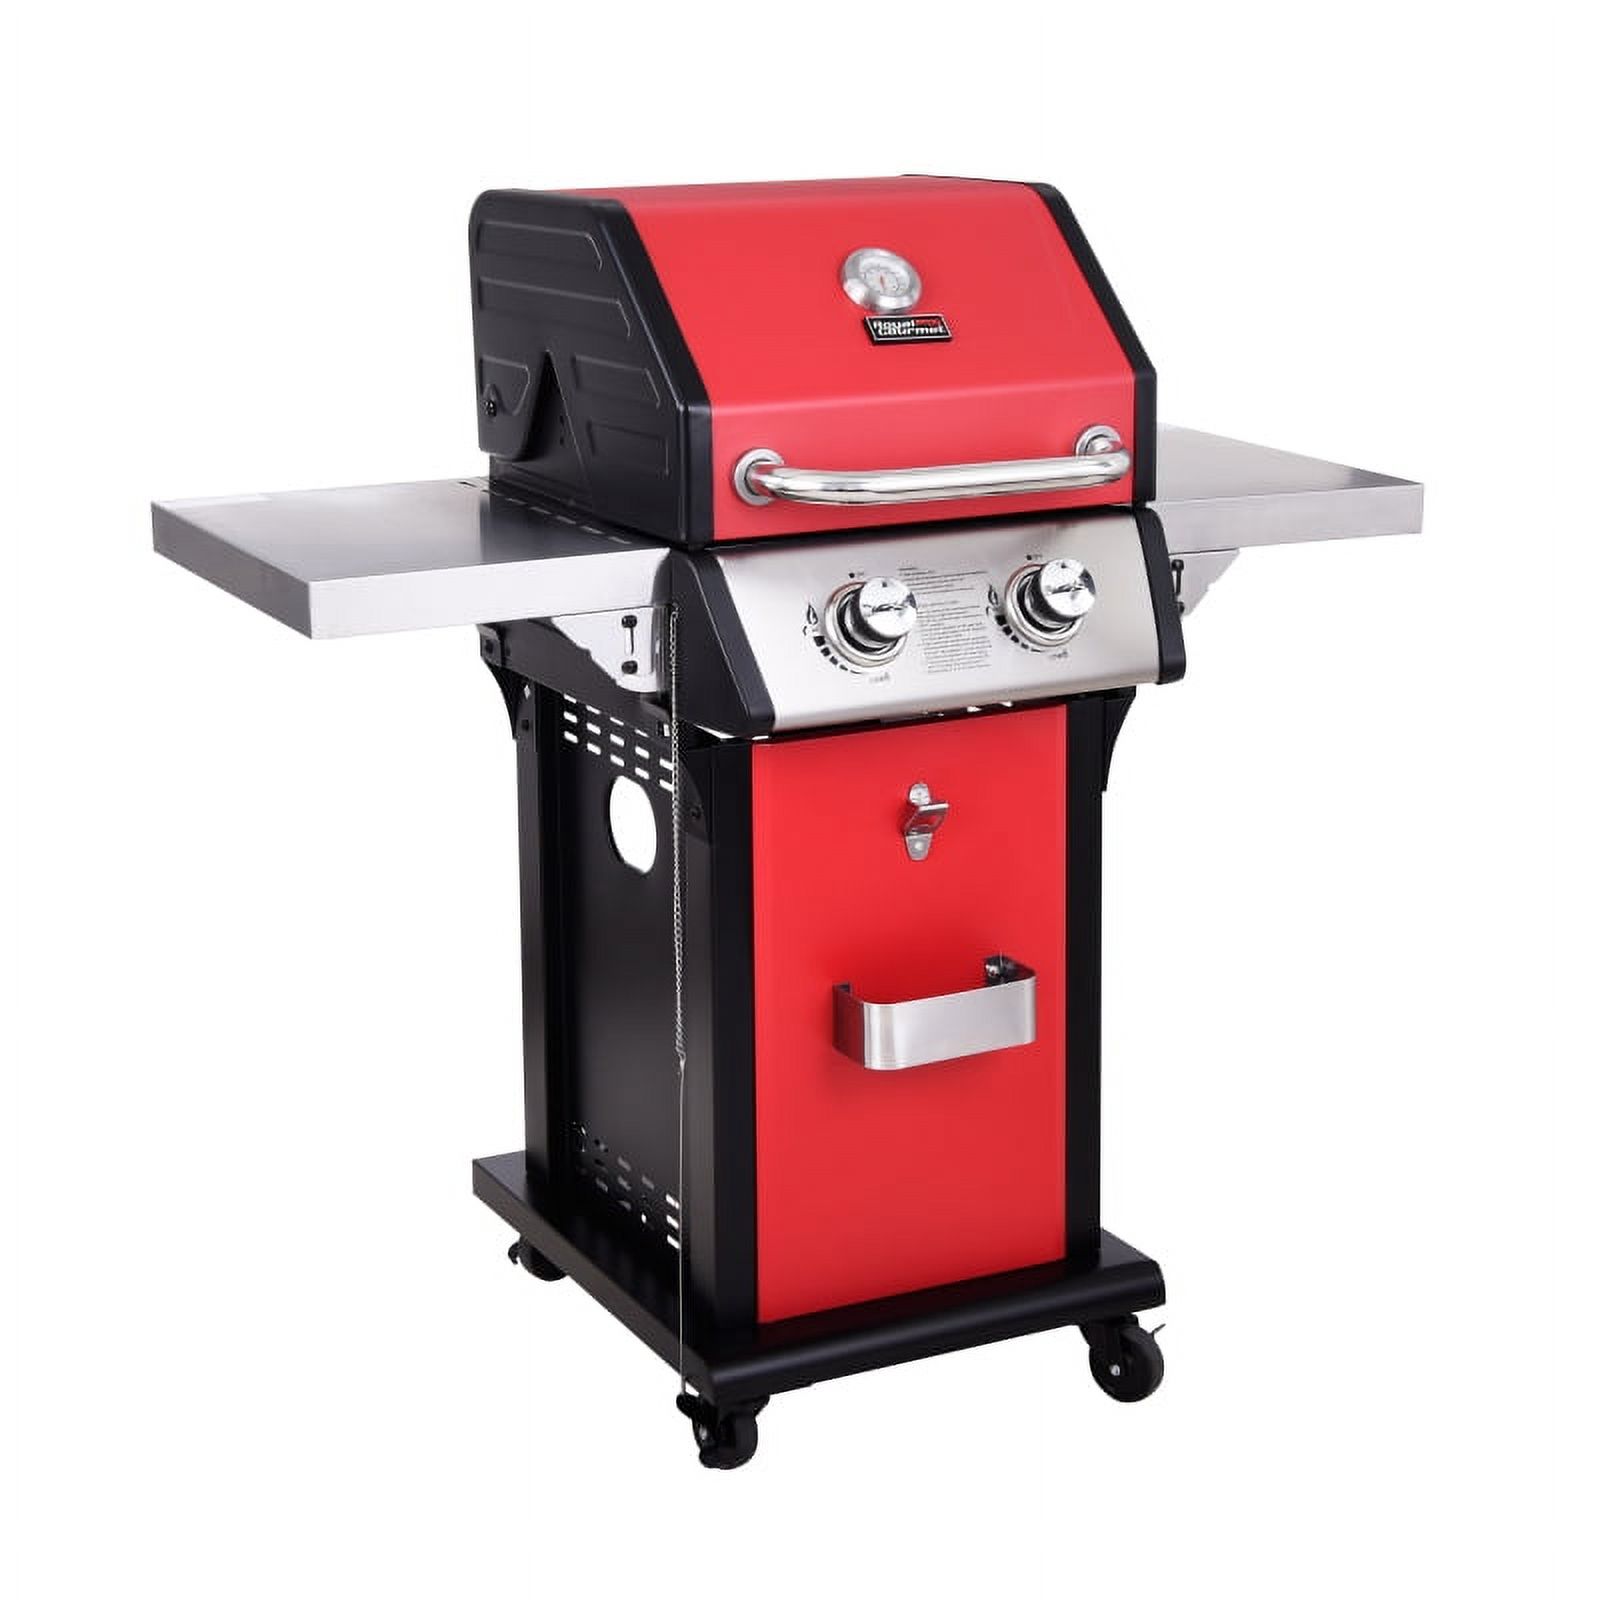 Royal Gourmet GG2004 2-BurnerGas Grill, for Patio Cooking Family Gatherings, Red - image 3 of 3